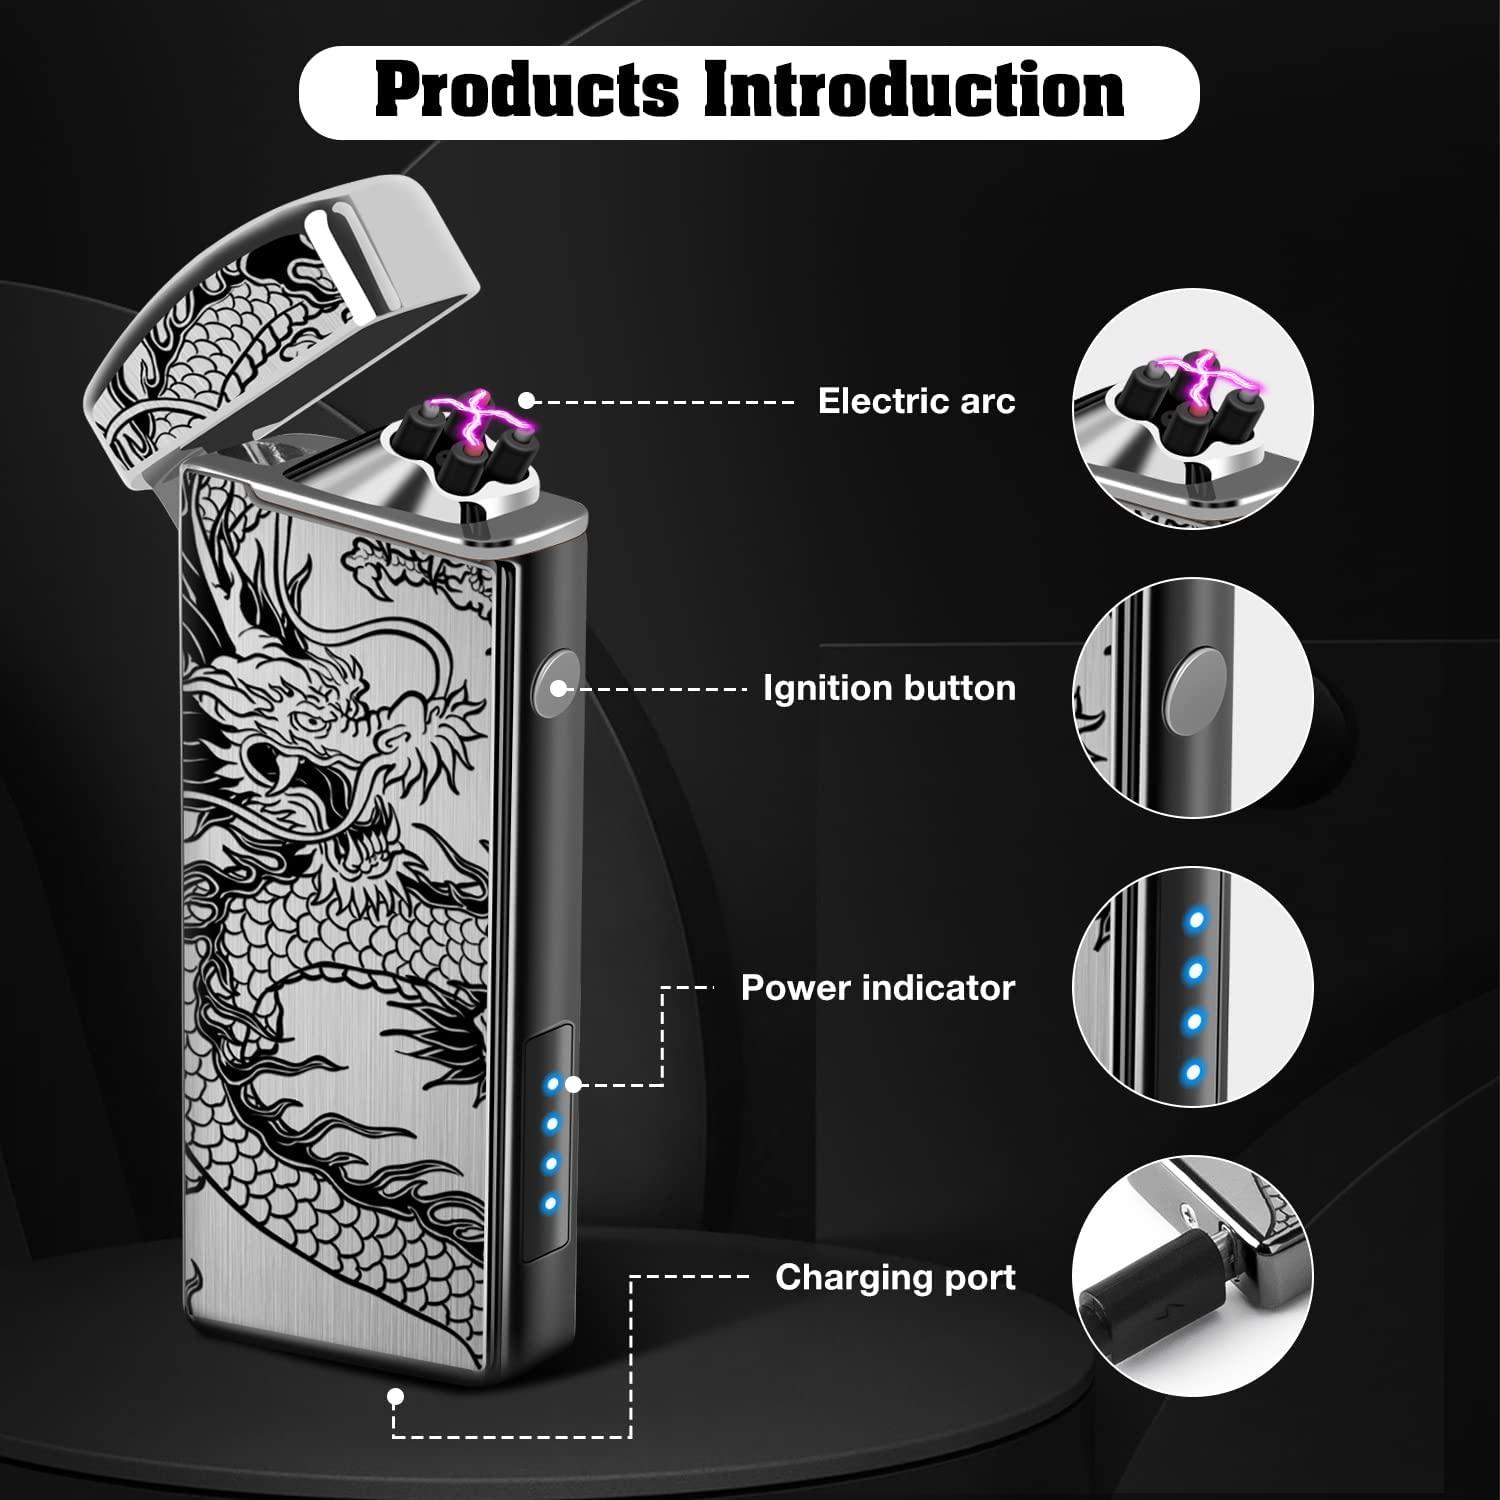 LcFun Rechargeable Lighter Electric Arc Lighter Plasma Lighters Cool Windproof Flameless Lighters with LED Display Power for Incense, Camping (Black